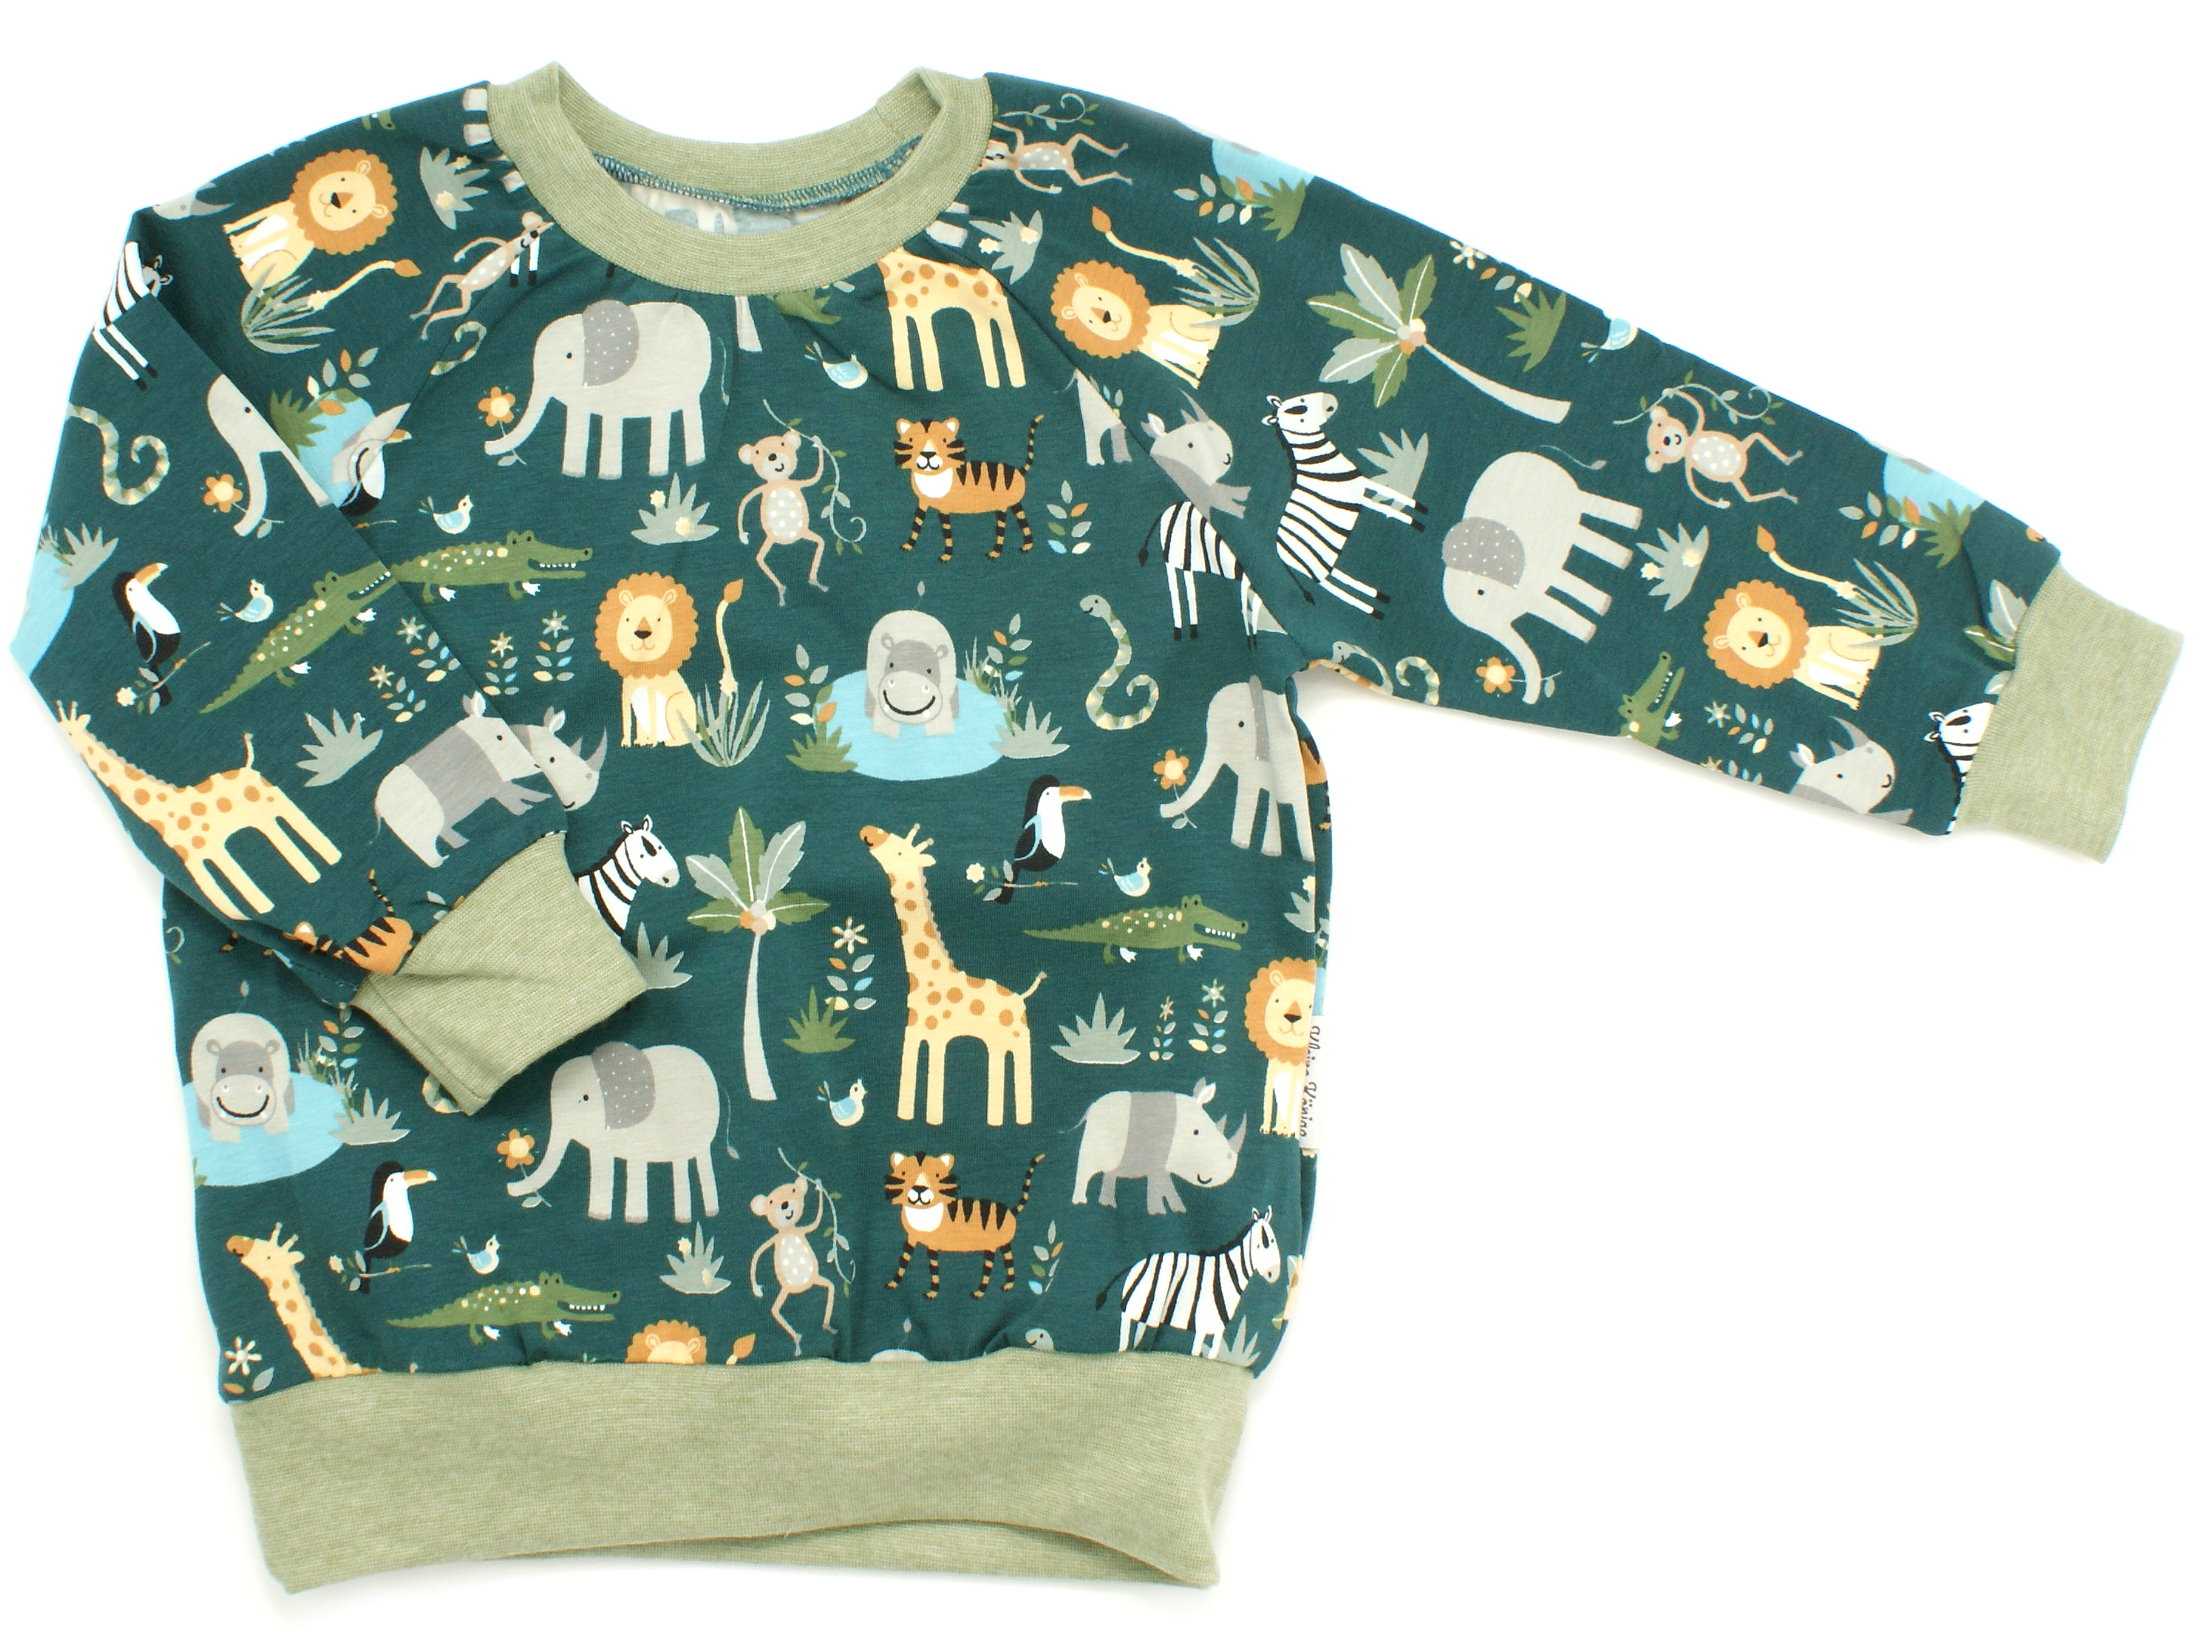 Kinder Pullover Shirt Dschungeltiere "Zooparty" petrol